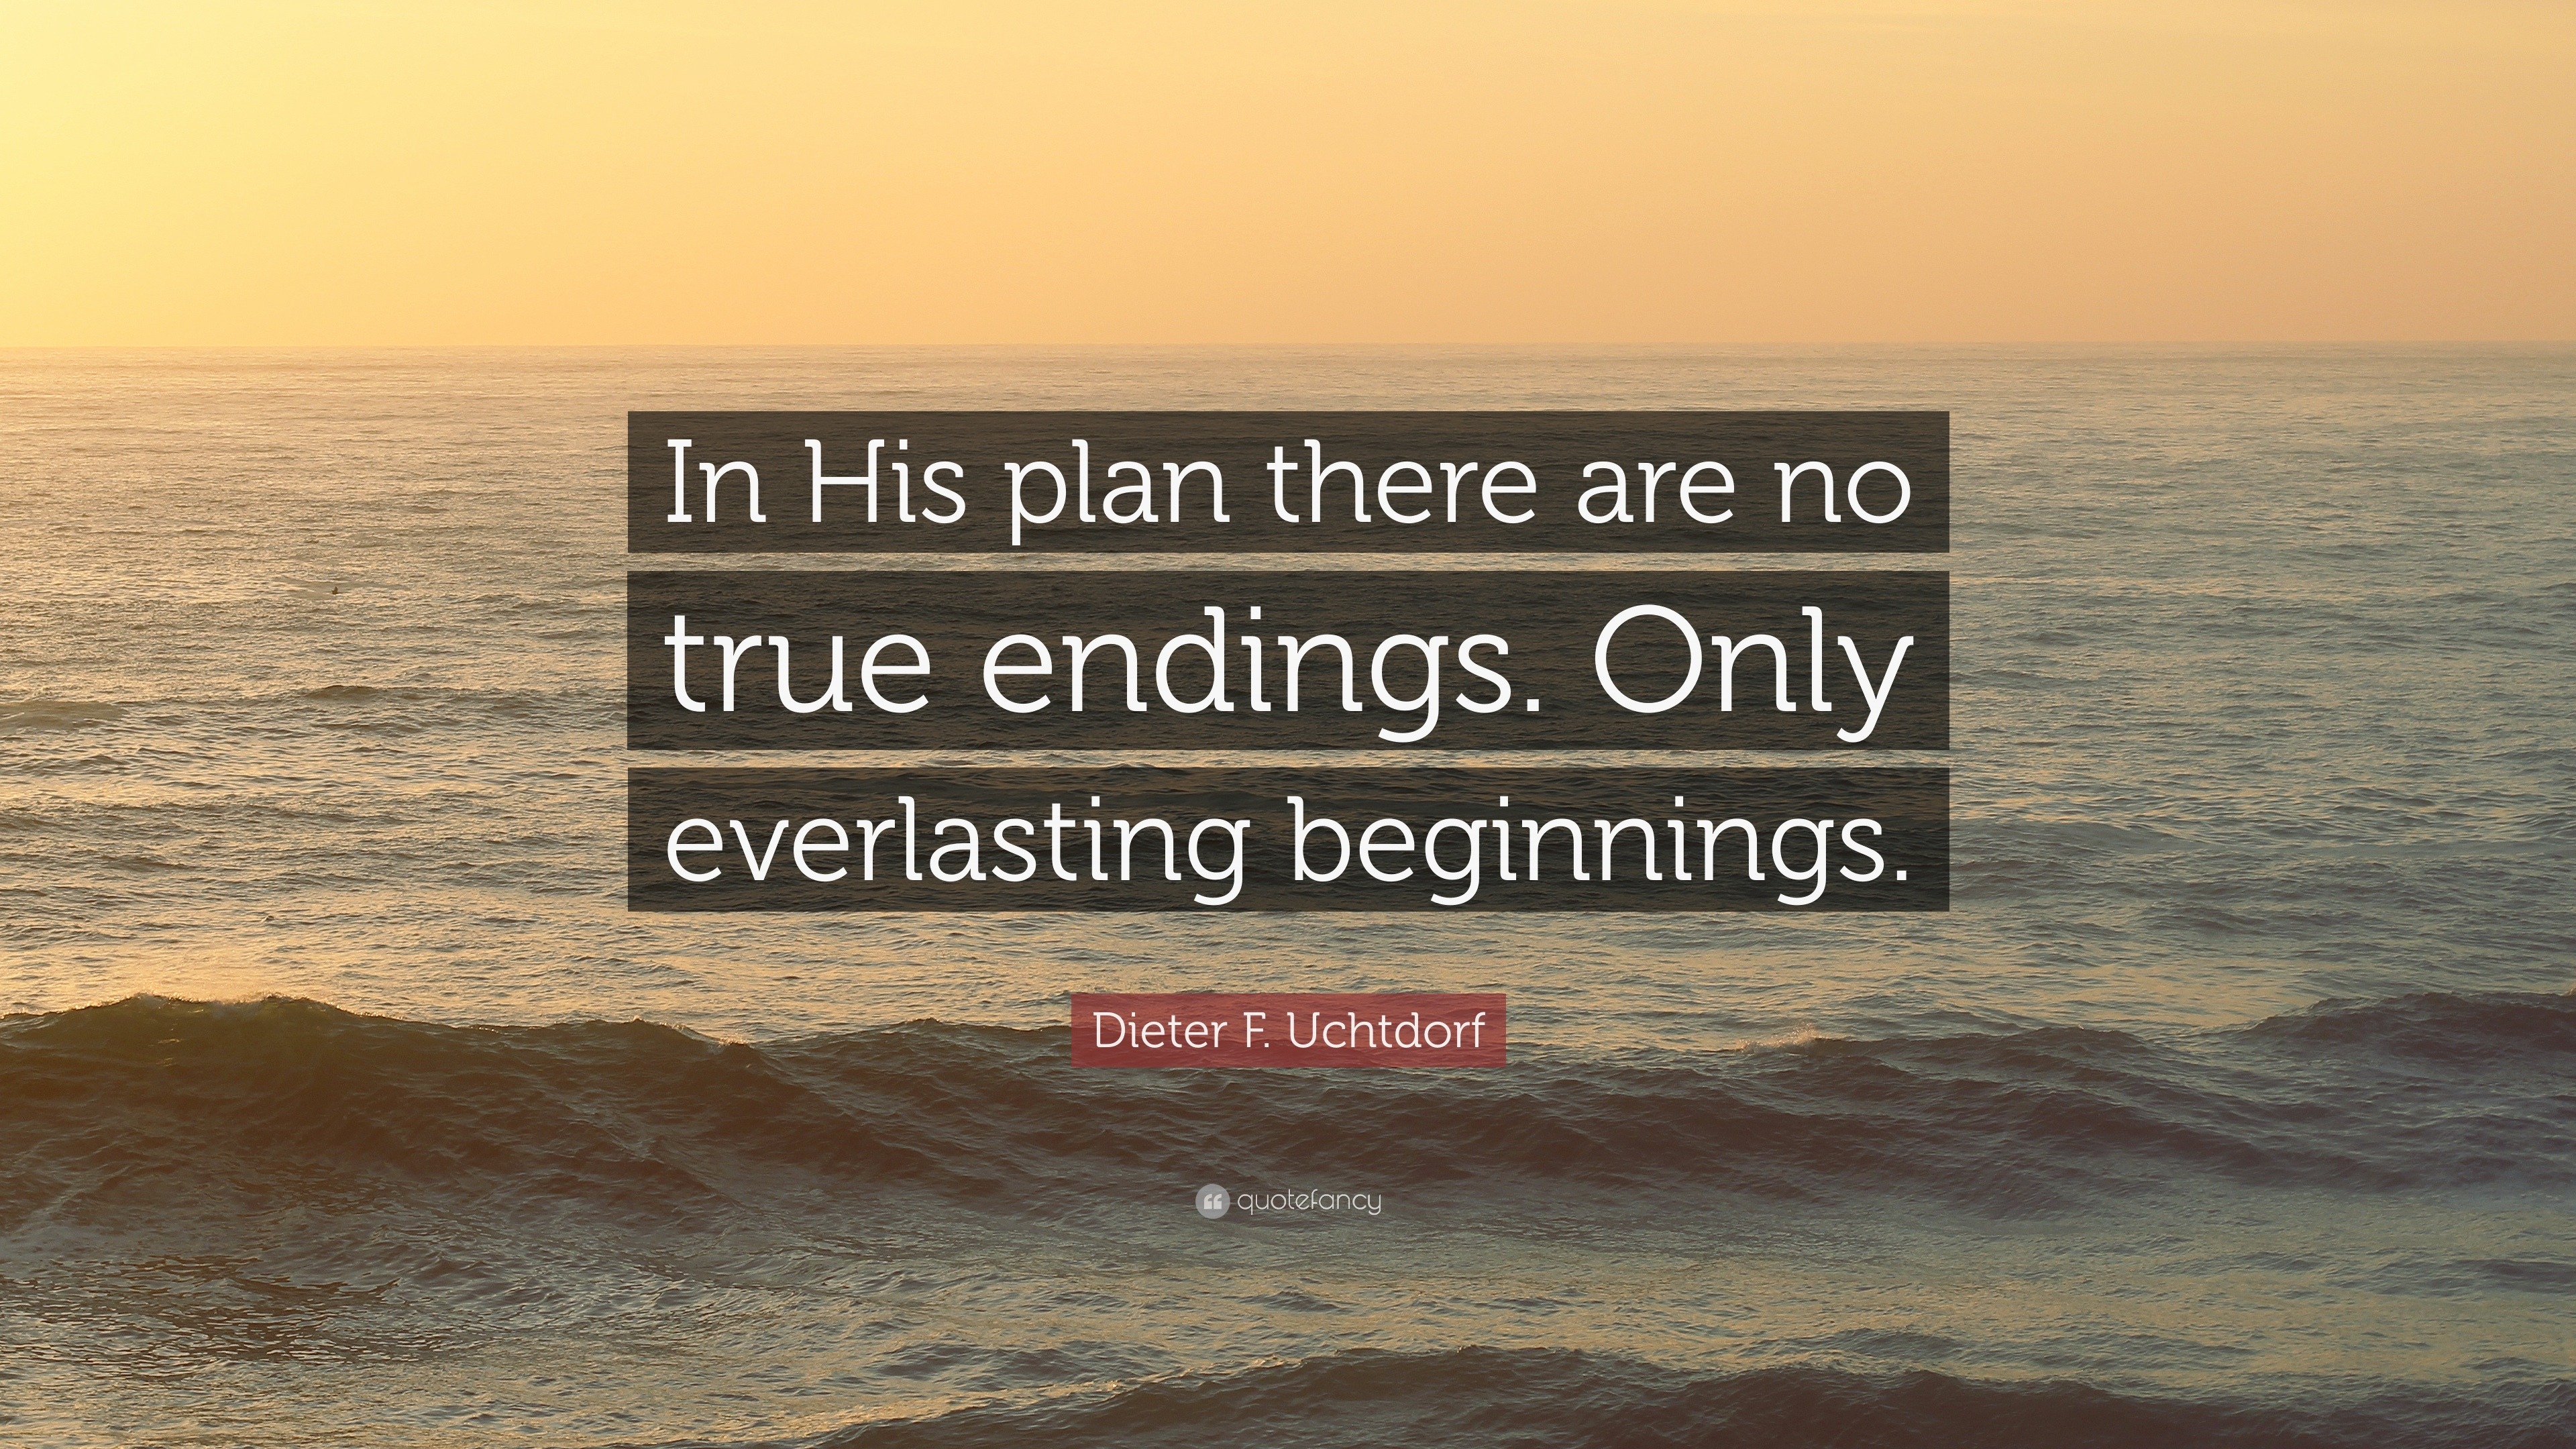 https://quotefancy.com/media/wallpaper/3840x2160/1803554-Dieter-F-Uchtdorf-Quote-In-His-plan-there-are-no-true-endings-Only.jpg